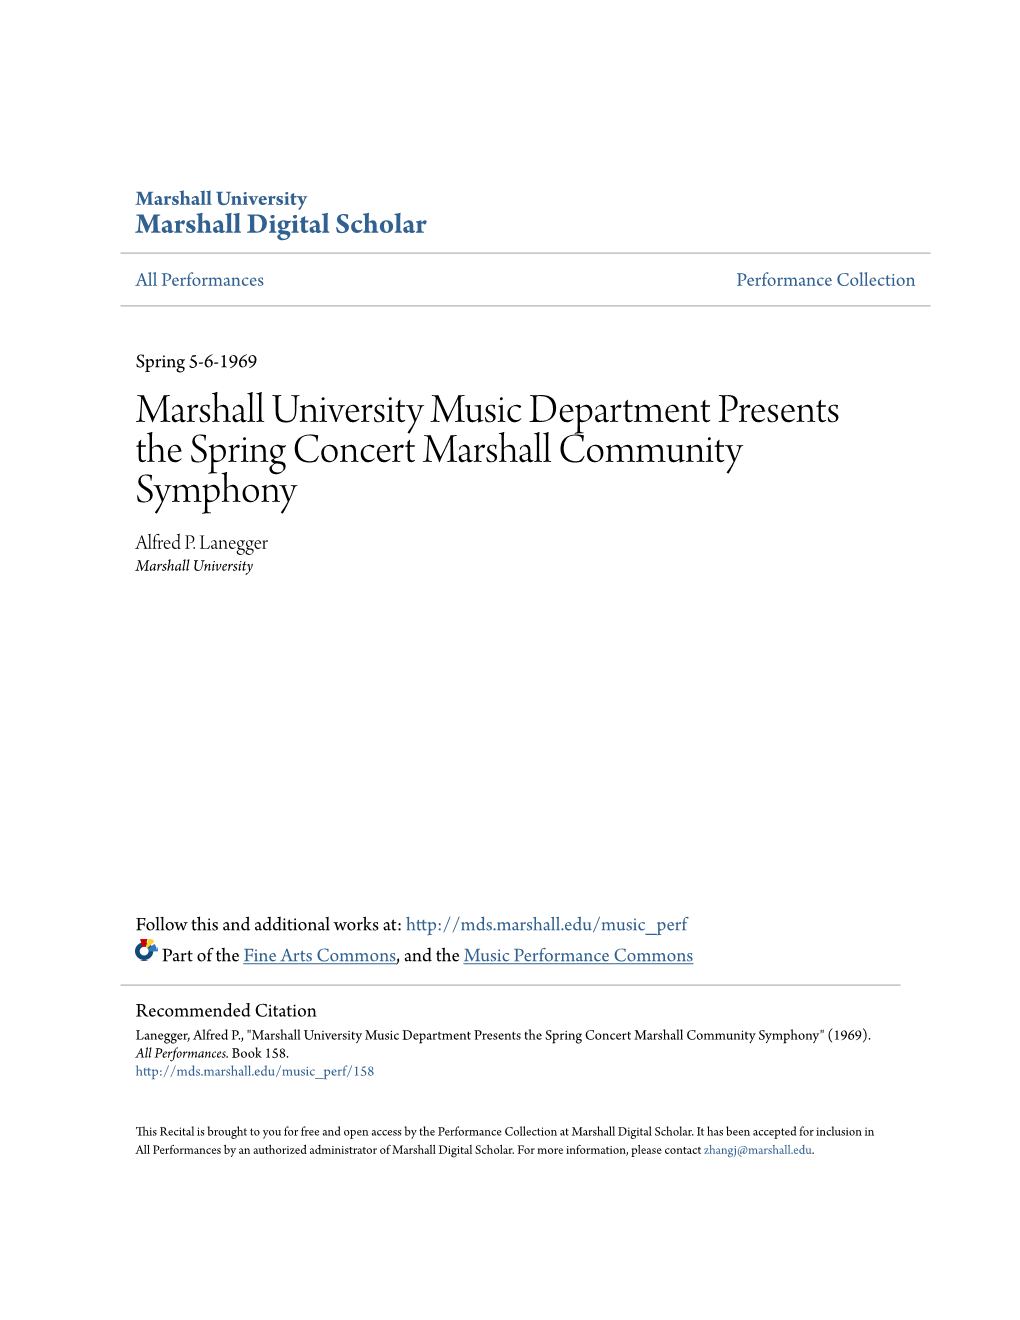 Marshall University Music Department Presents the Spring Concert Marshall Community Symphony Alfred P